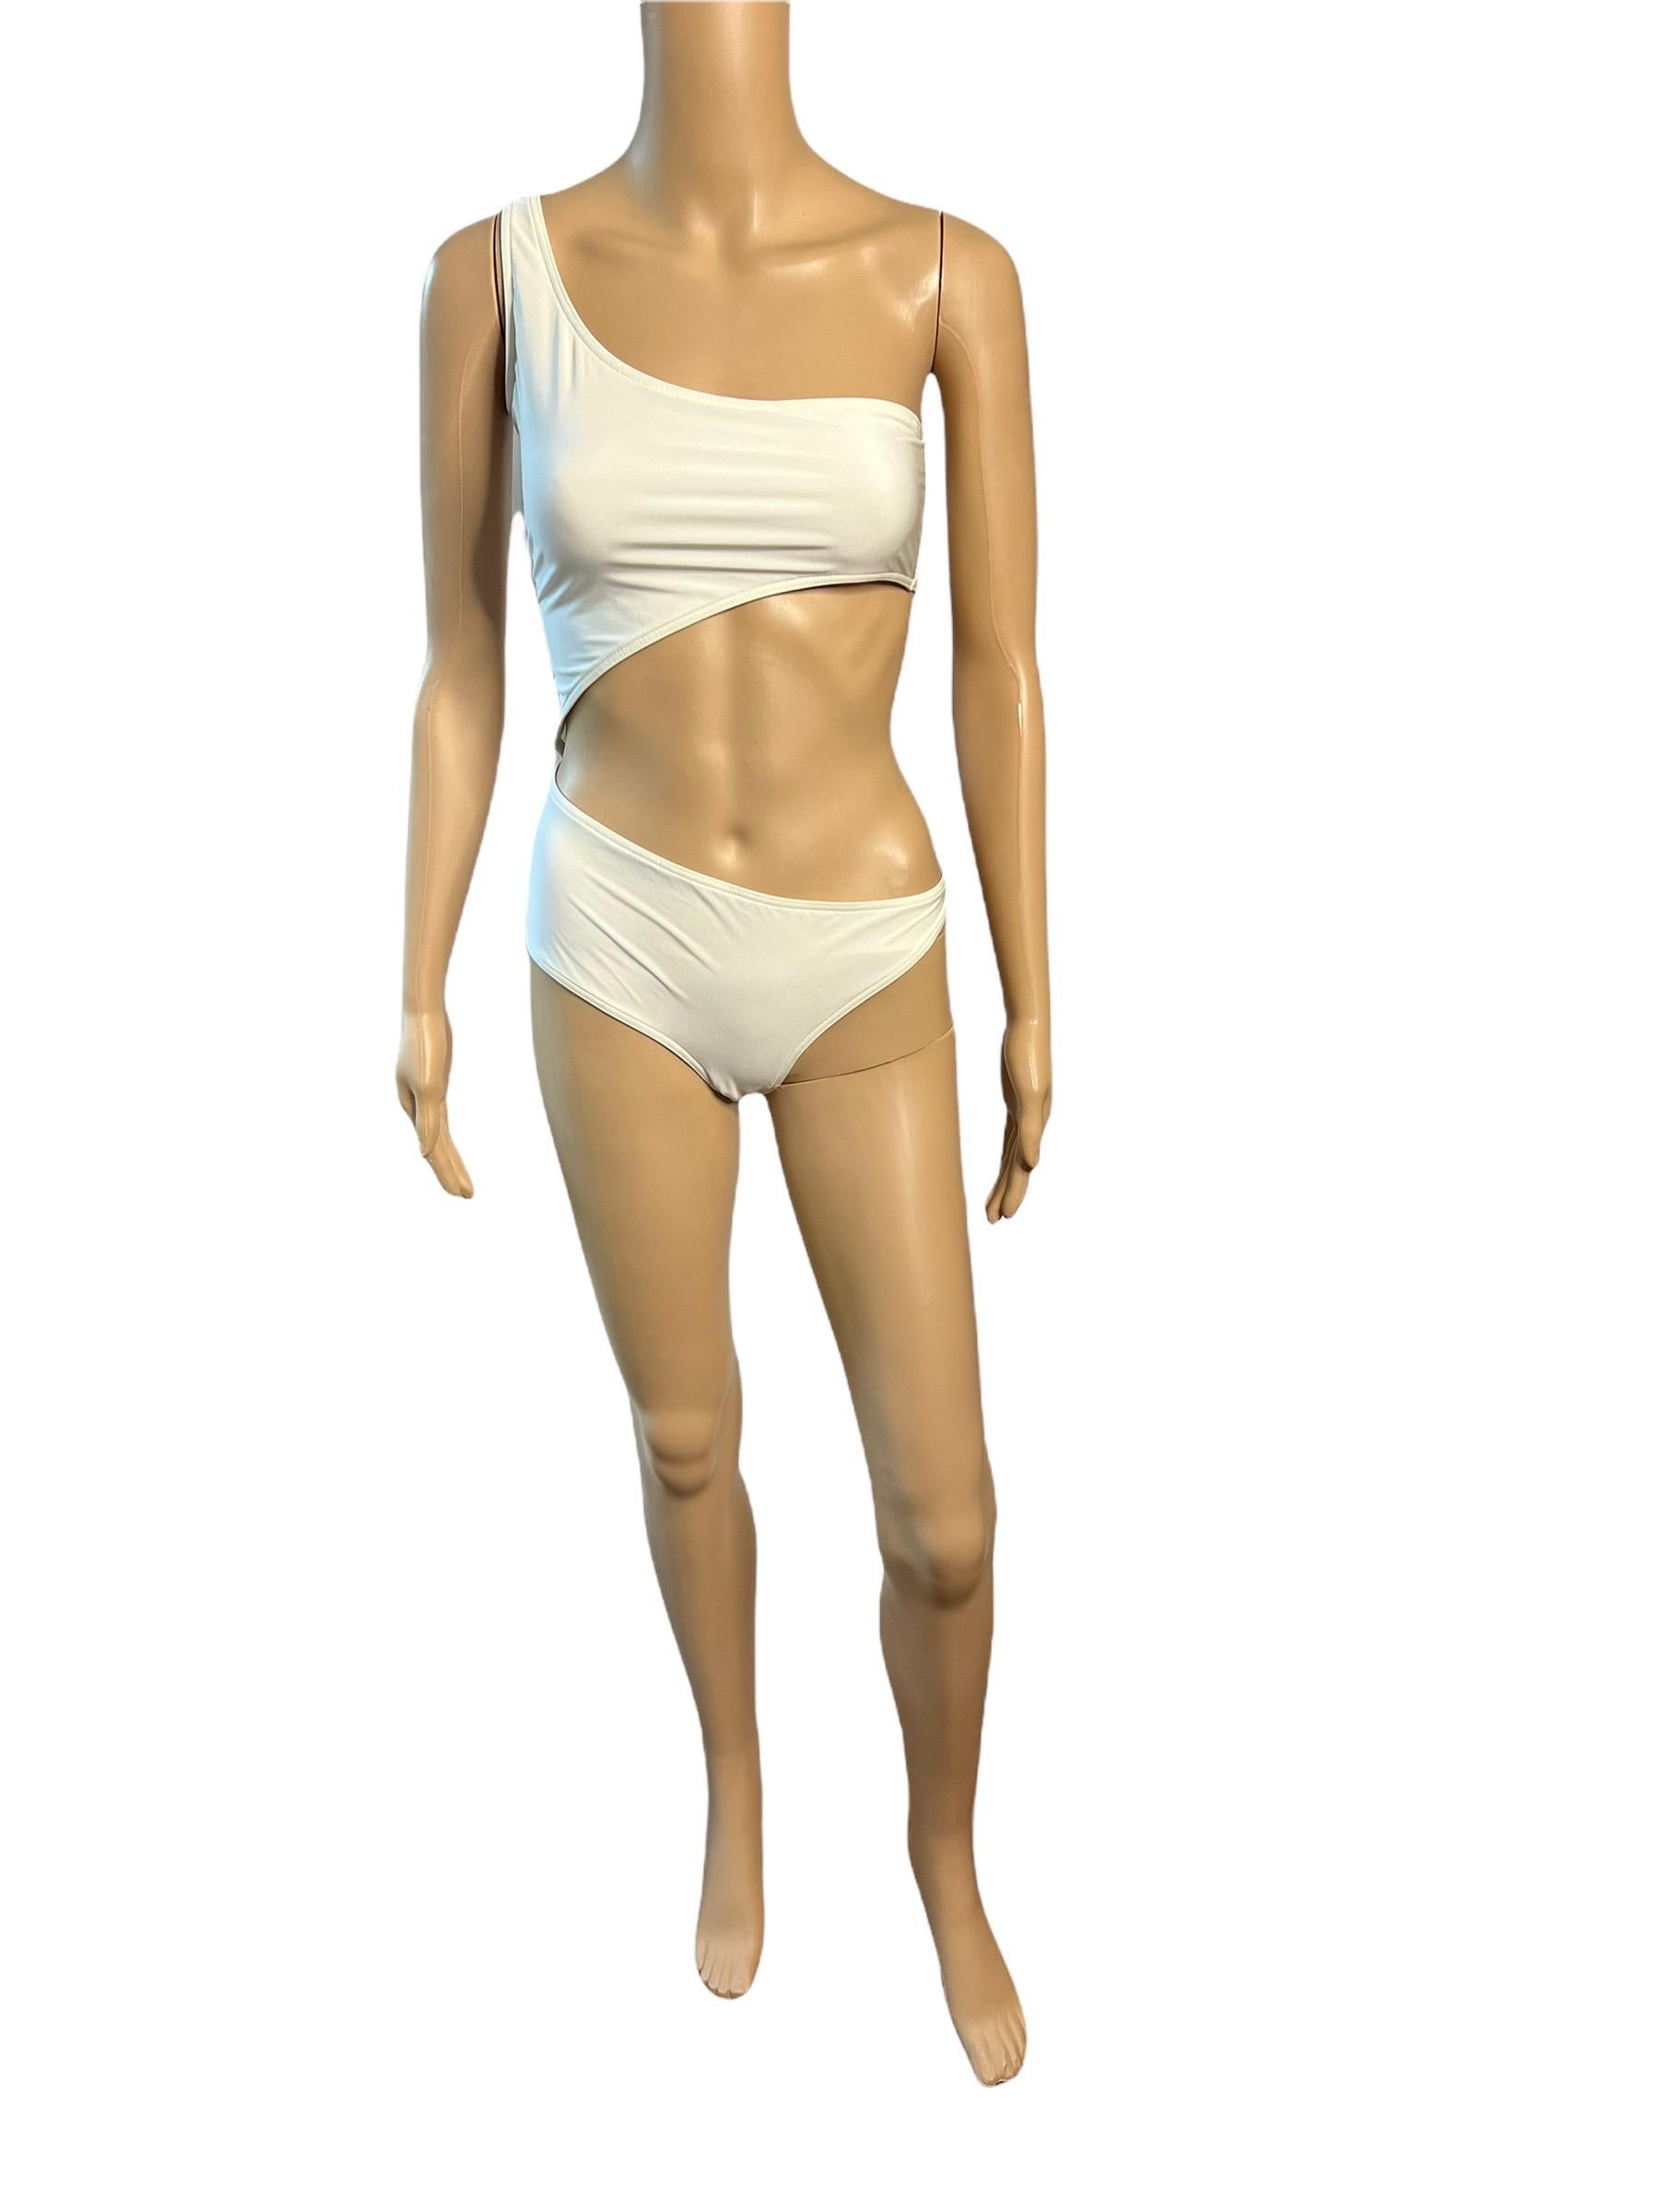 Tom Ford for Gucci S/S 2000 Sexy Cutout One Shoulder White Bodysuit Swimsuit 


